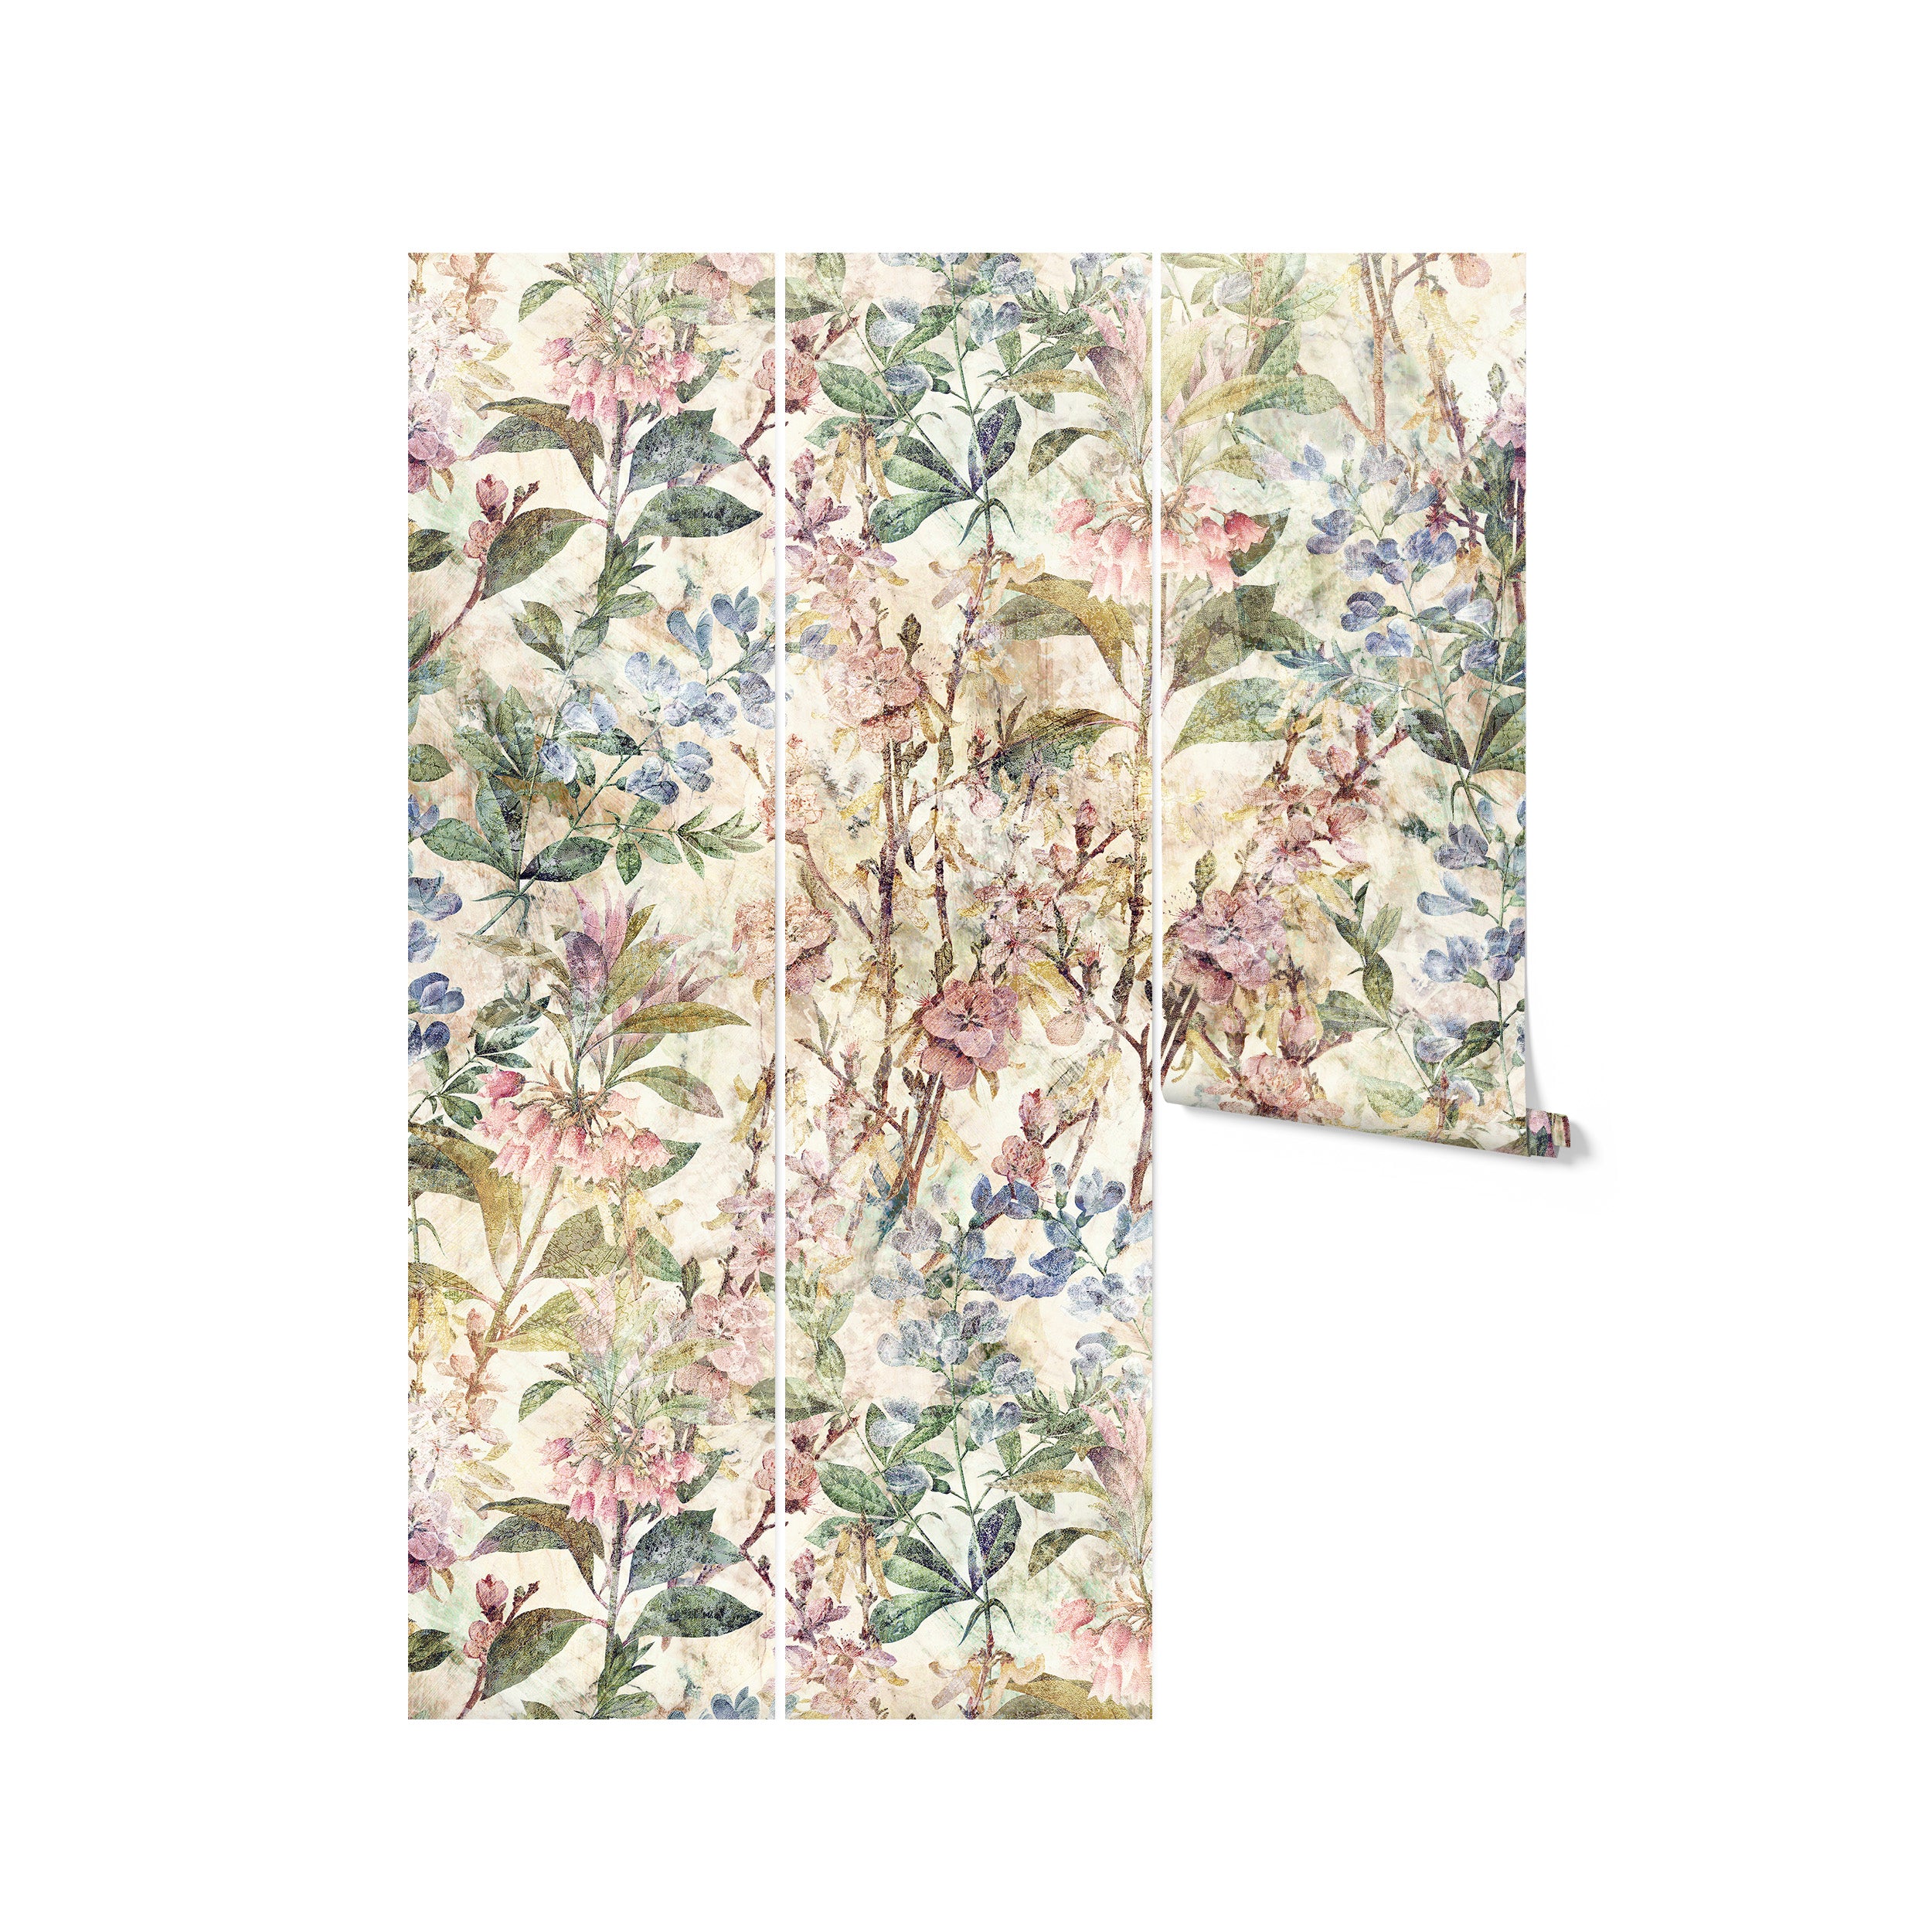 A display of the "Ancient Florals Wallpaper," featuring multiple rolls against a neutral background, highlighting the extensive and detailed design of blooming flowers and foliage in muted pastel tones, ideal for creating a striking visual impact in any room.